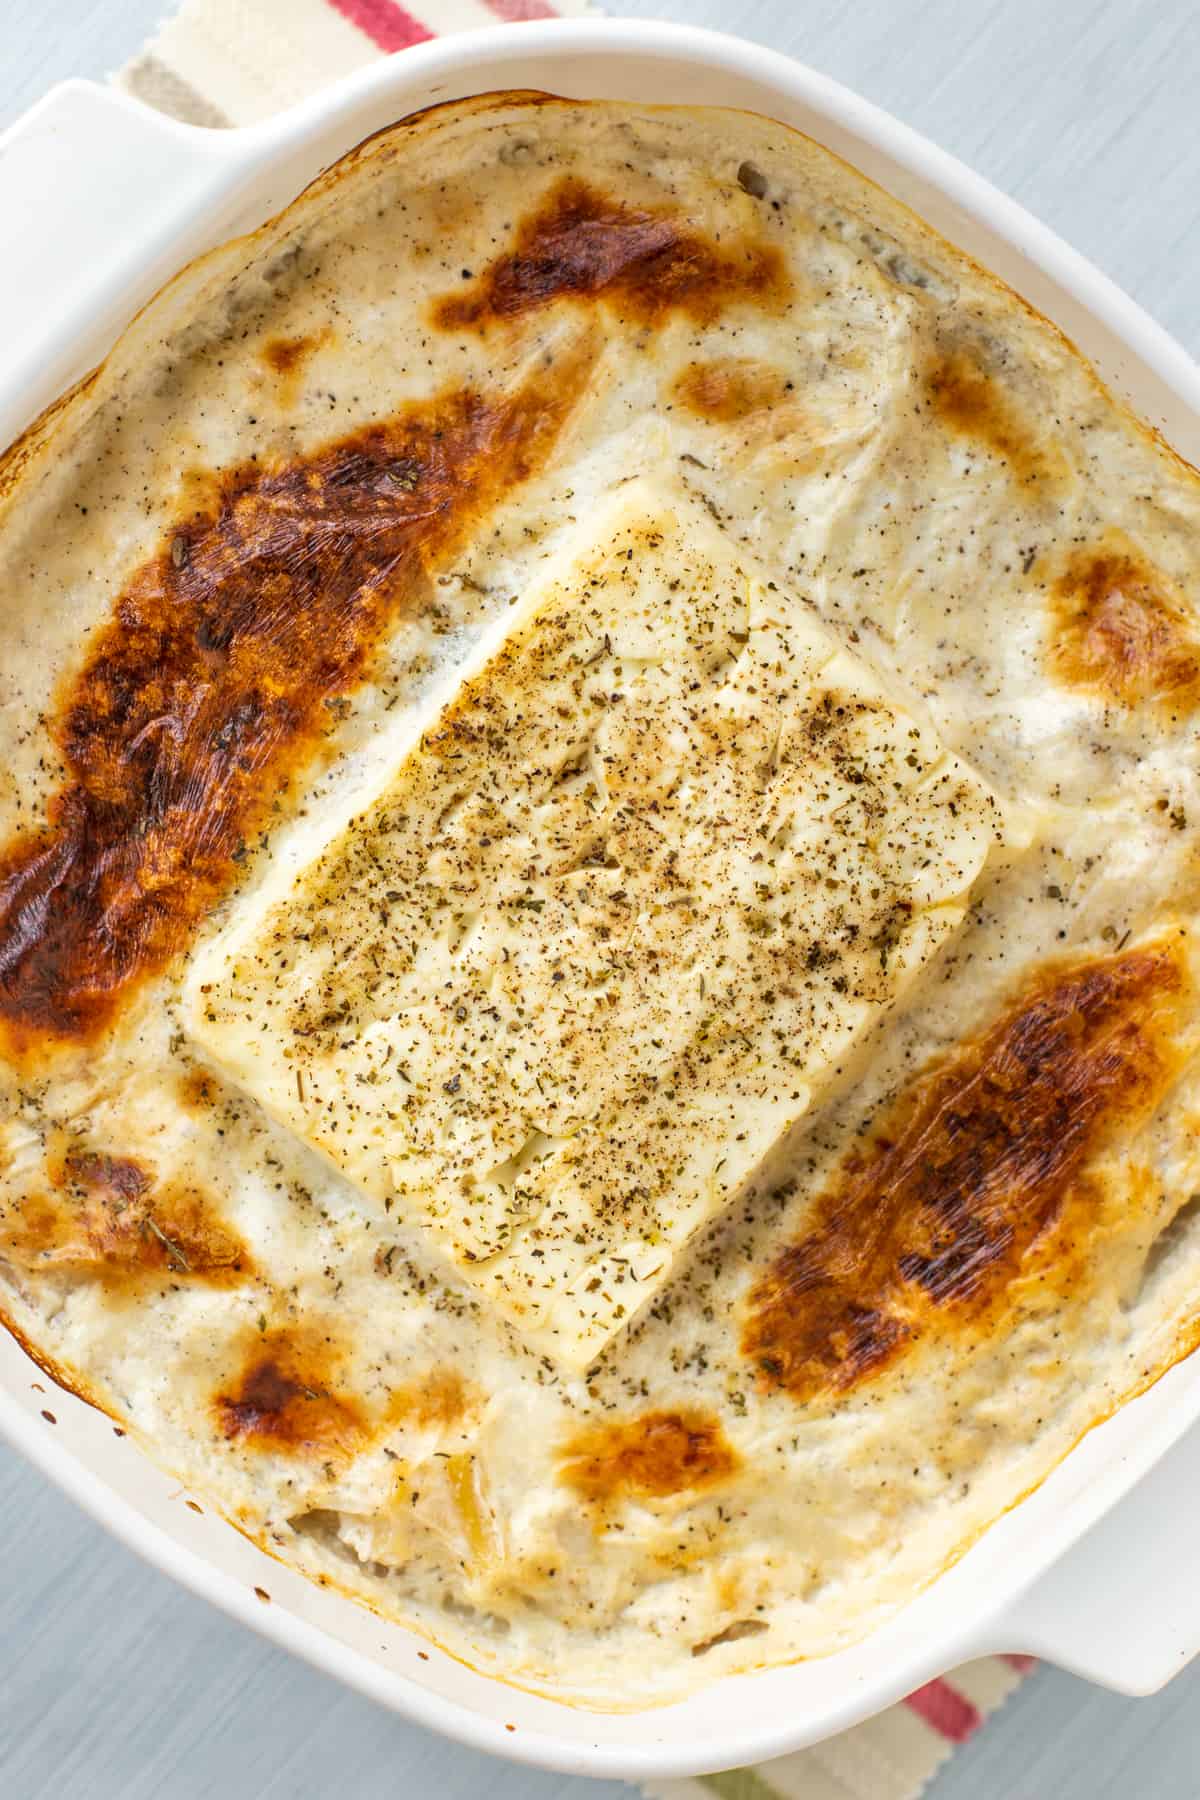 Mac and cheese in a baking dish with a block of crispy baked feta in the middle.